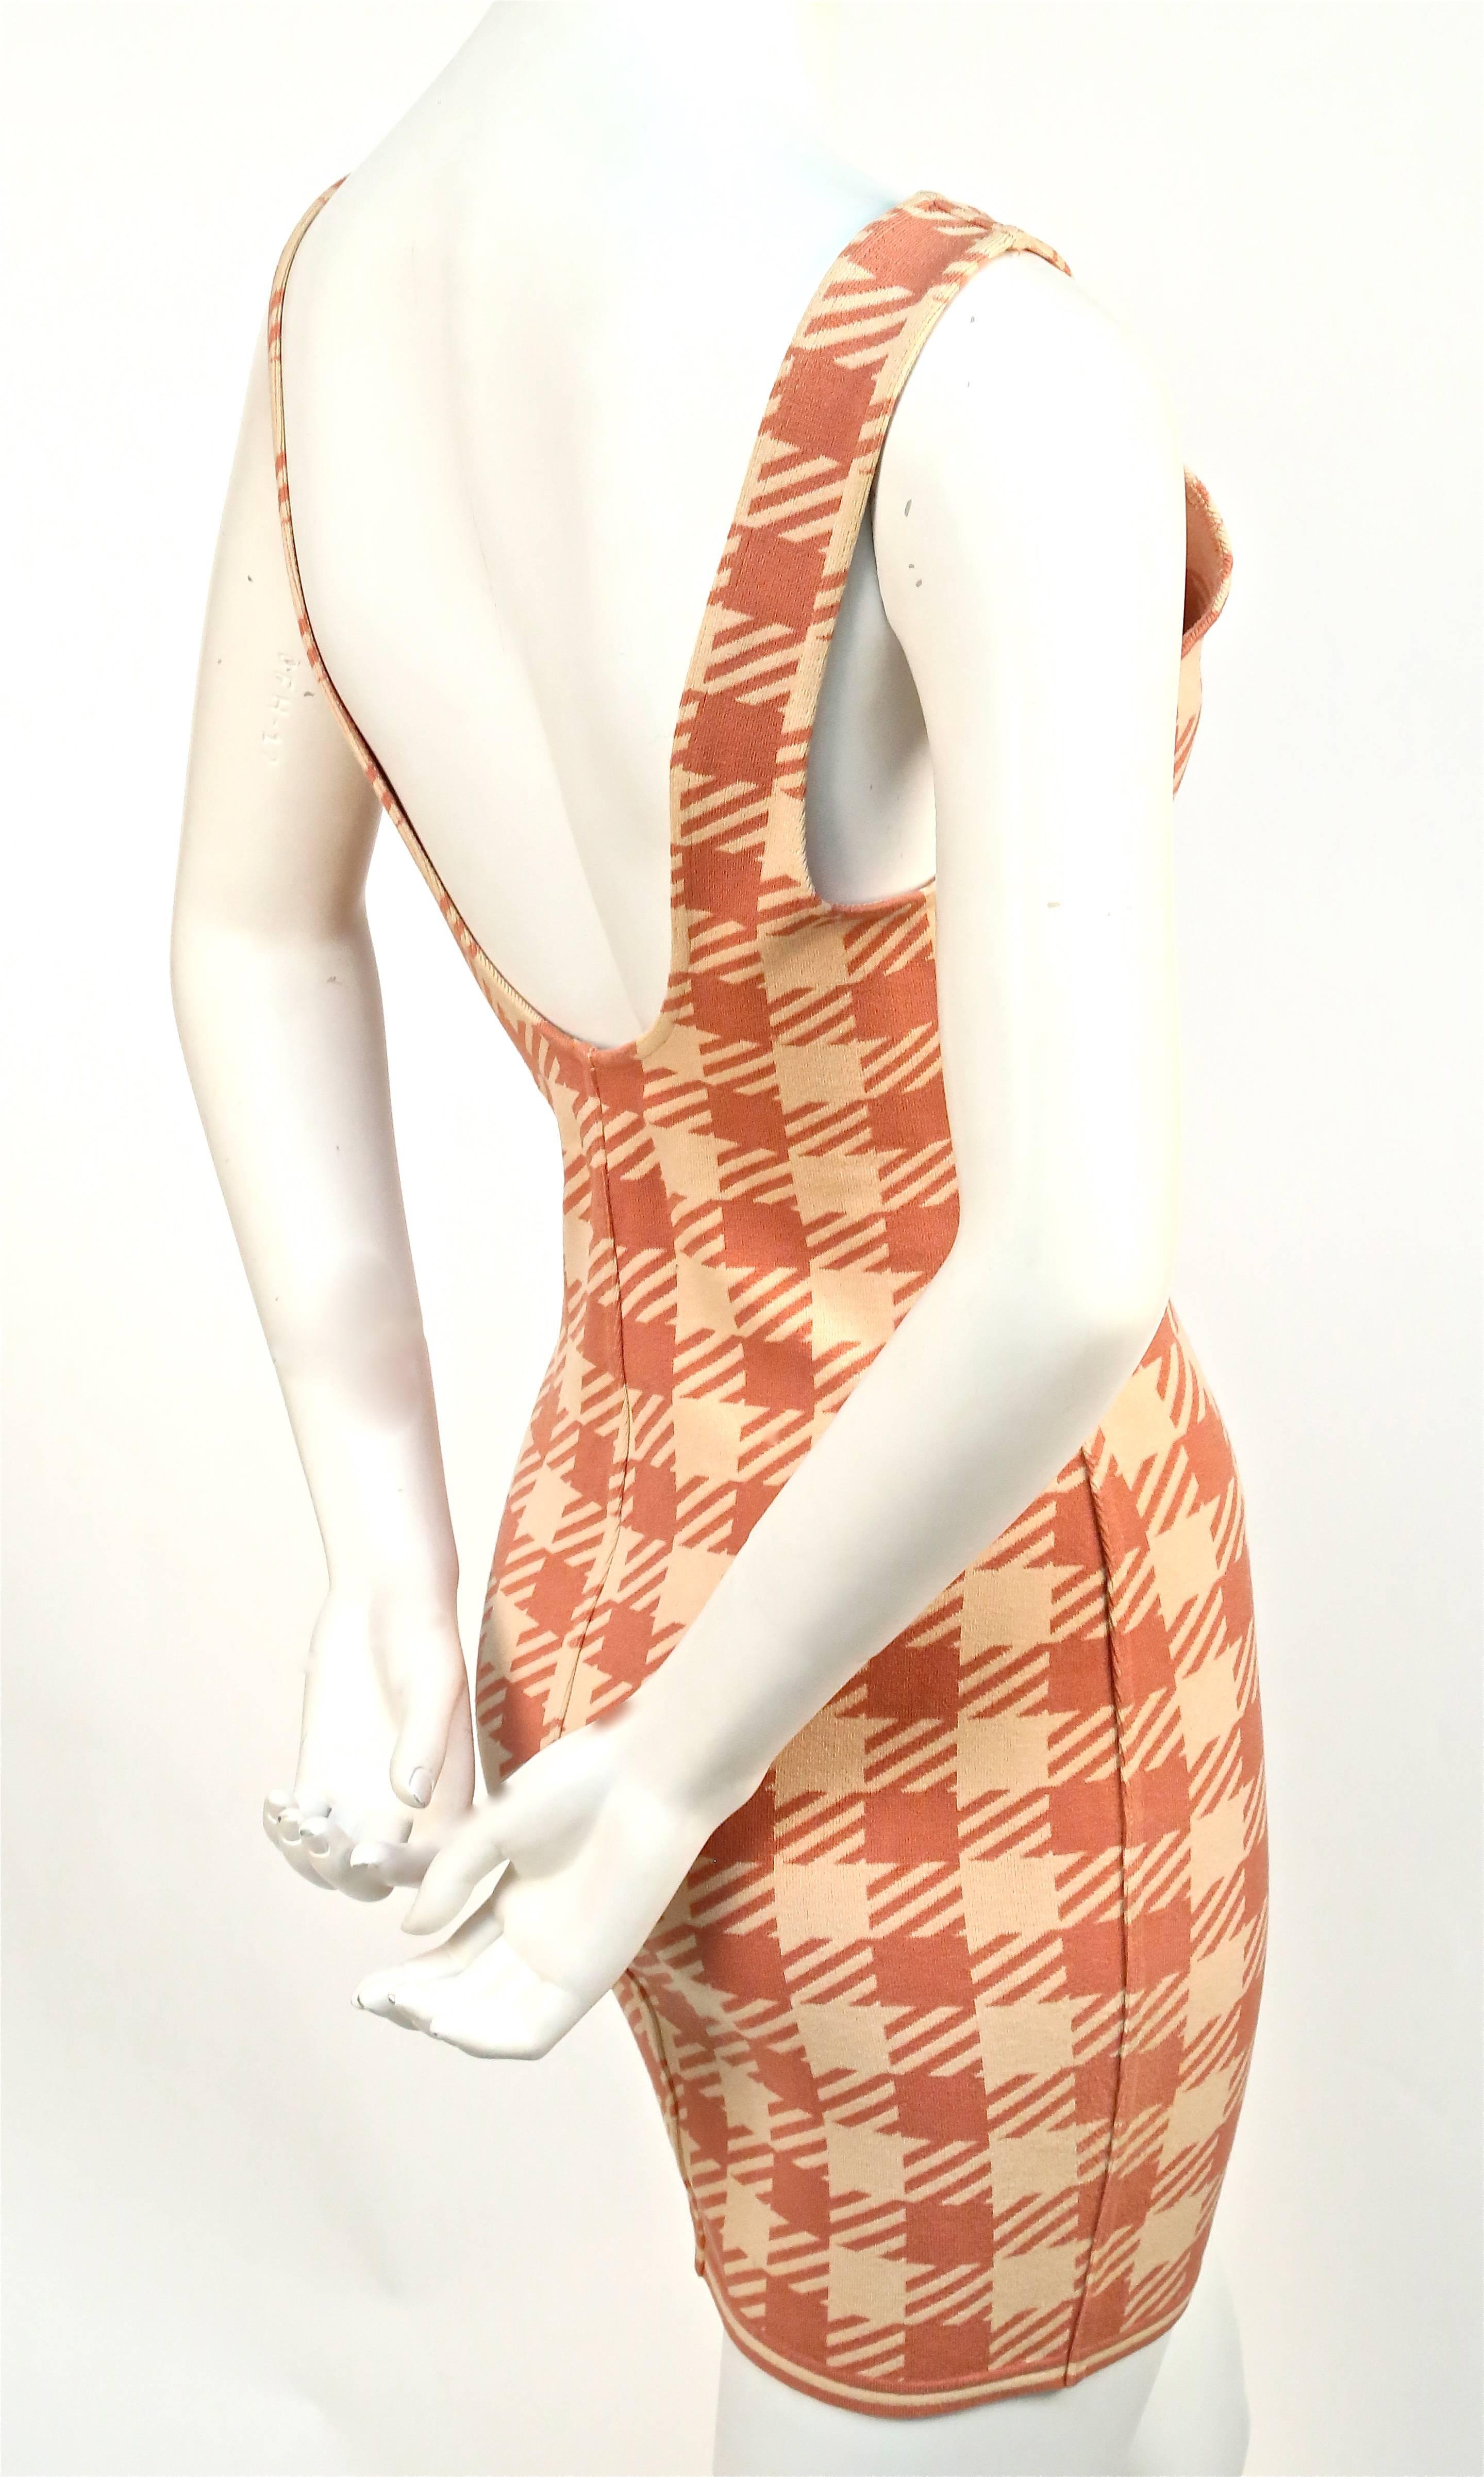 Very rare and well documented houndstooth check dress designed by Azzedine Alaia dating to the spring of 1991 'Tati' collection. Fabric inspired by the iconic checked awnings of the Parisian discount chain store 'Tati'. Labeled a size 'M'. Dress